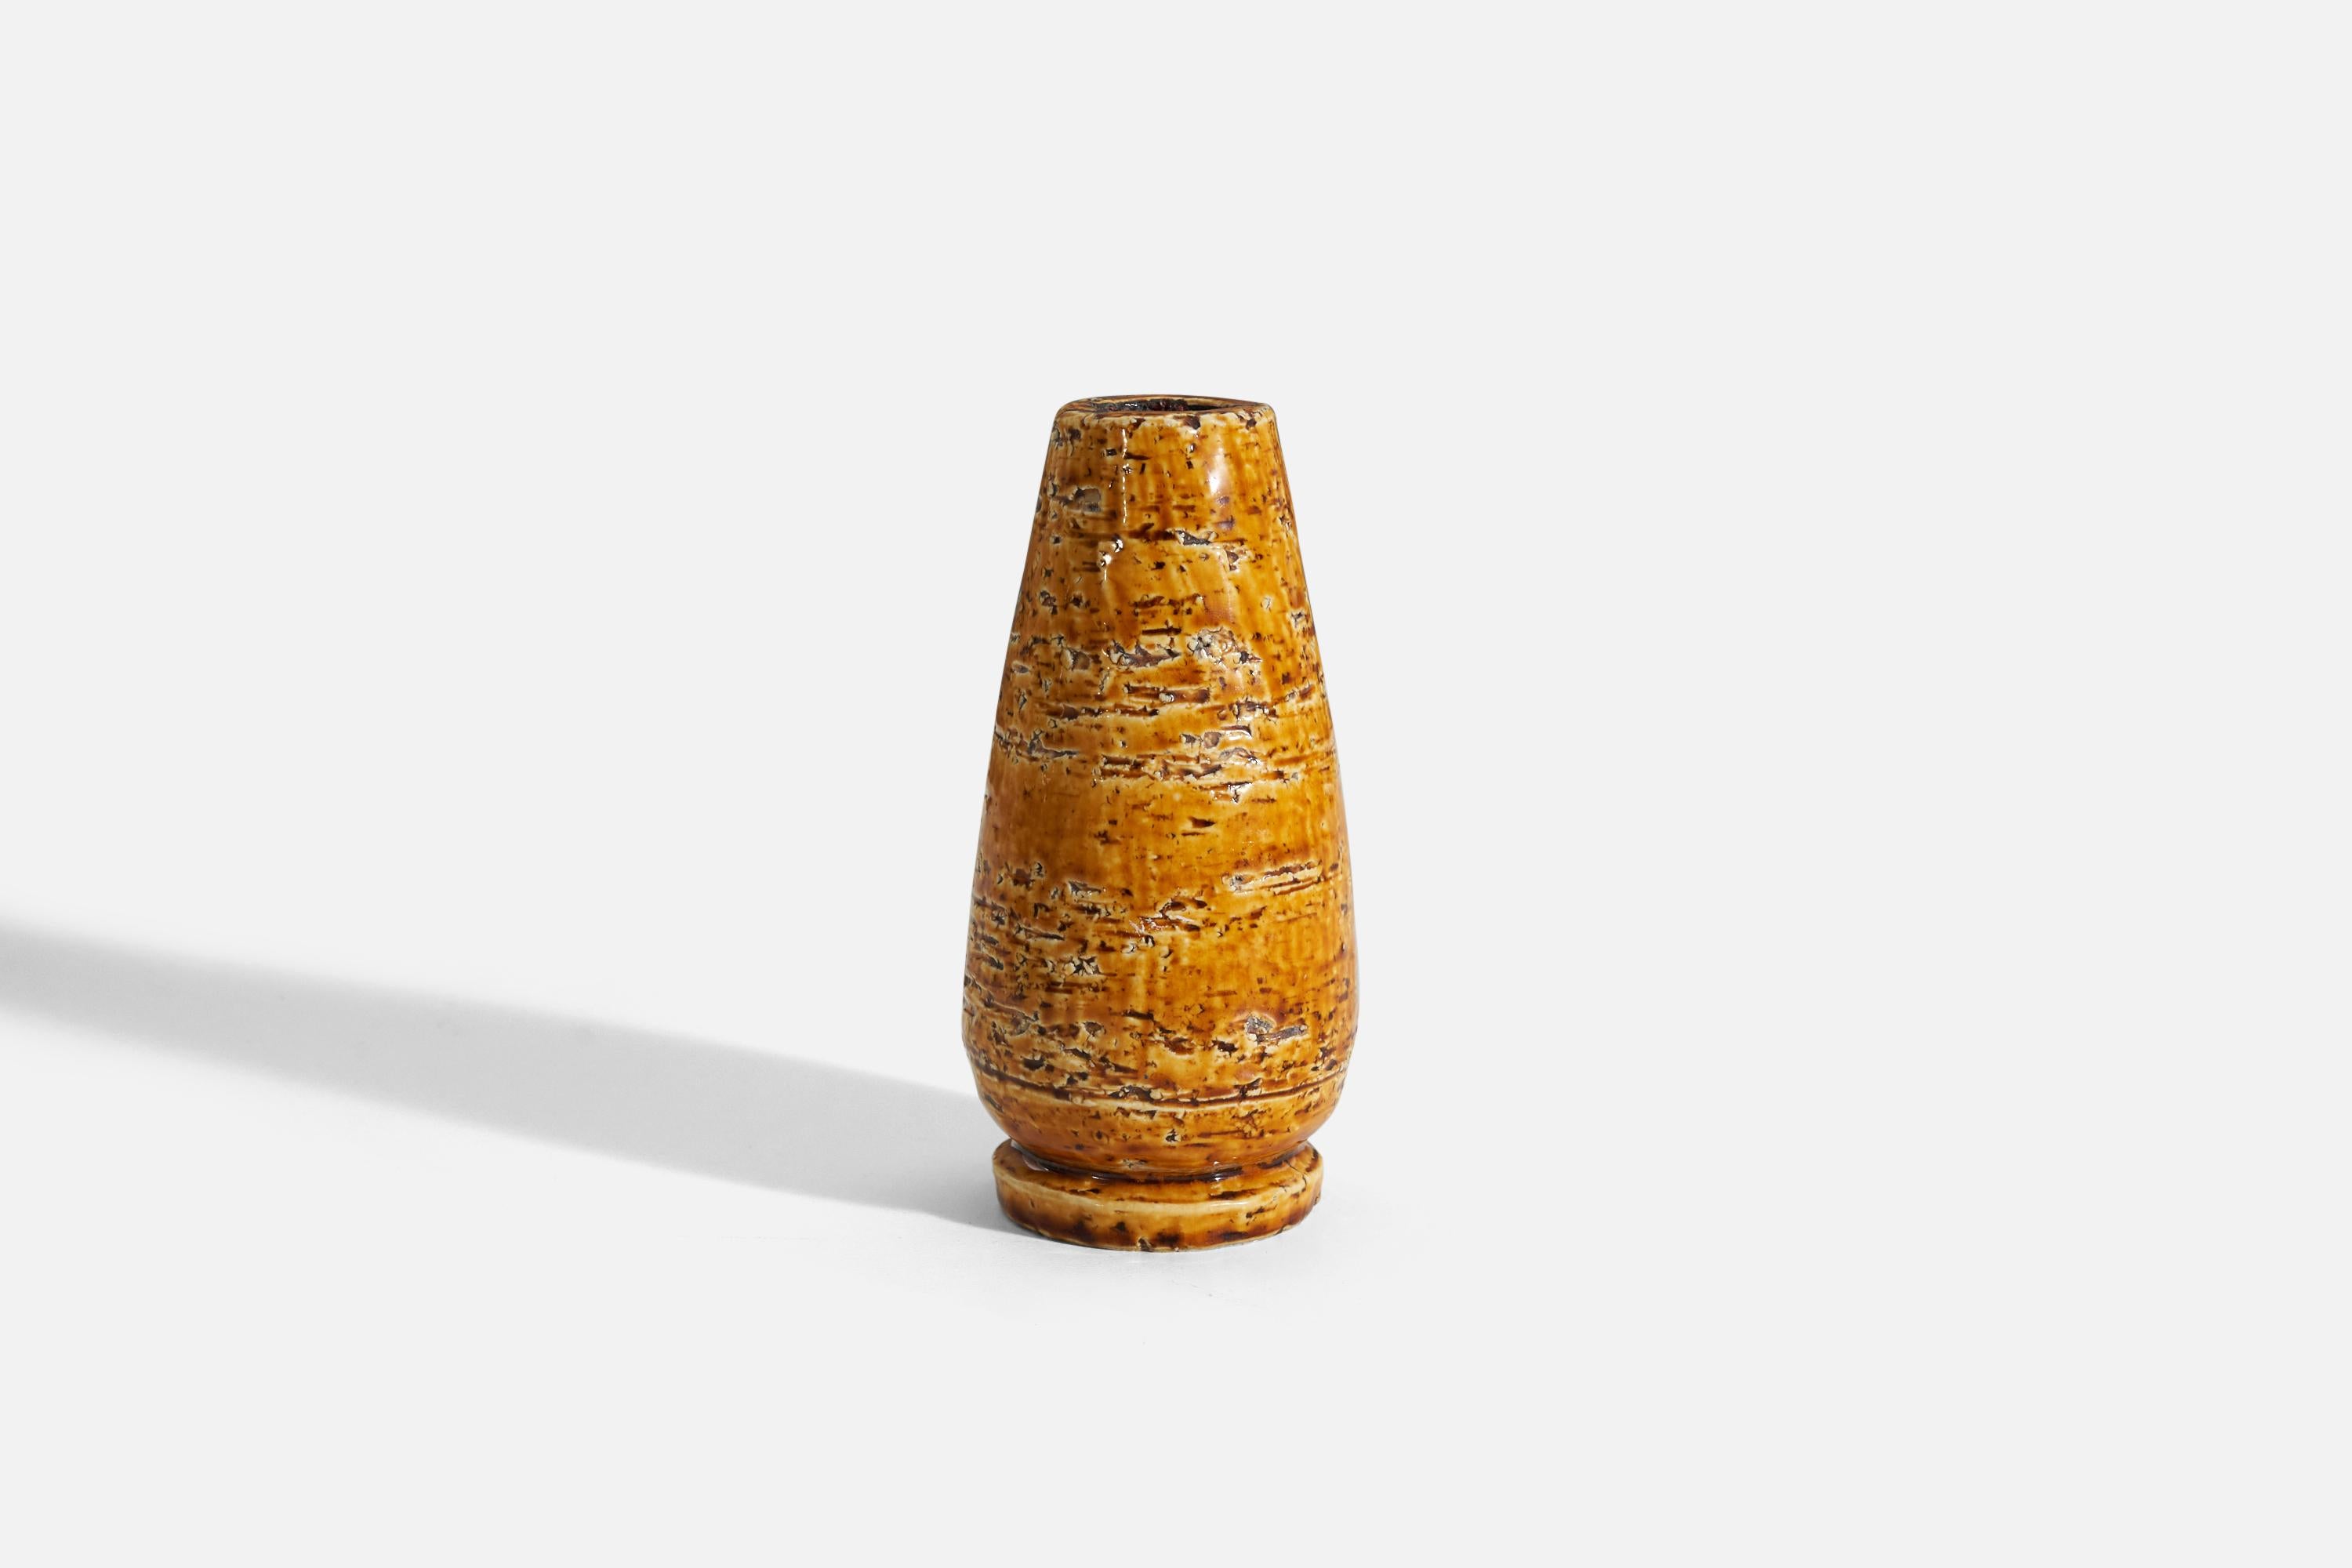 An orange glazed vase designed by Gunnar Nylund (Swedish, 1914-1997) and produced by Rörstrand, Sweden, 1940s. 

Nylund served as artistic director at Rörstrand, where he worked 1931-1955. Prior to his work at Rörstrand he was a well-established